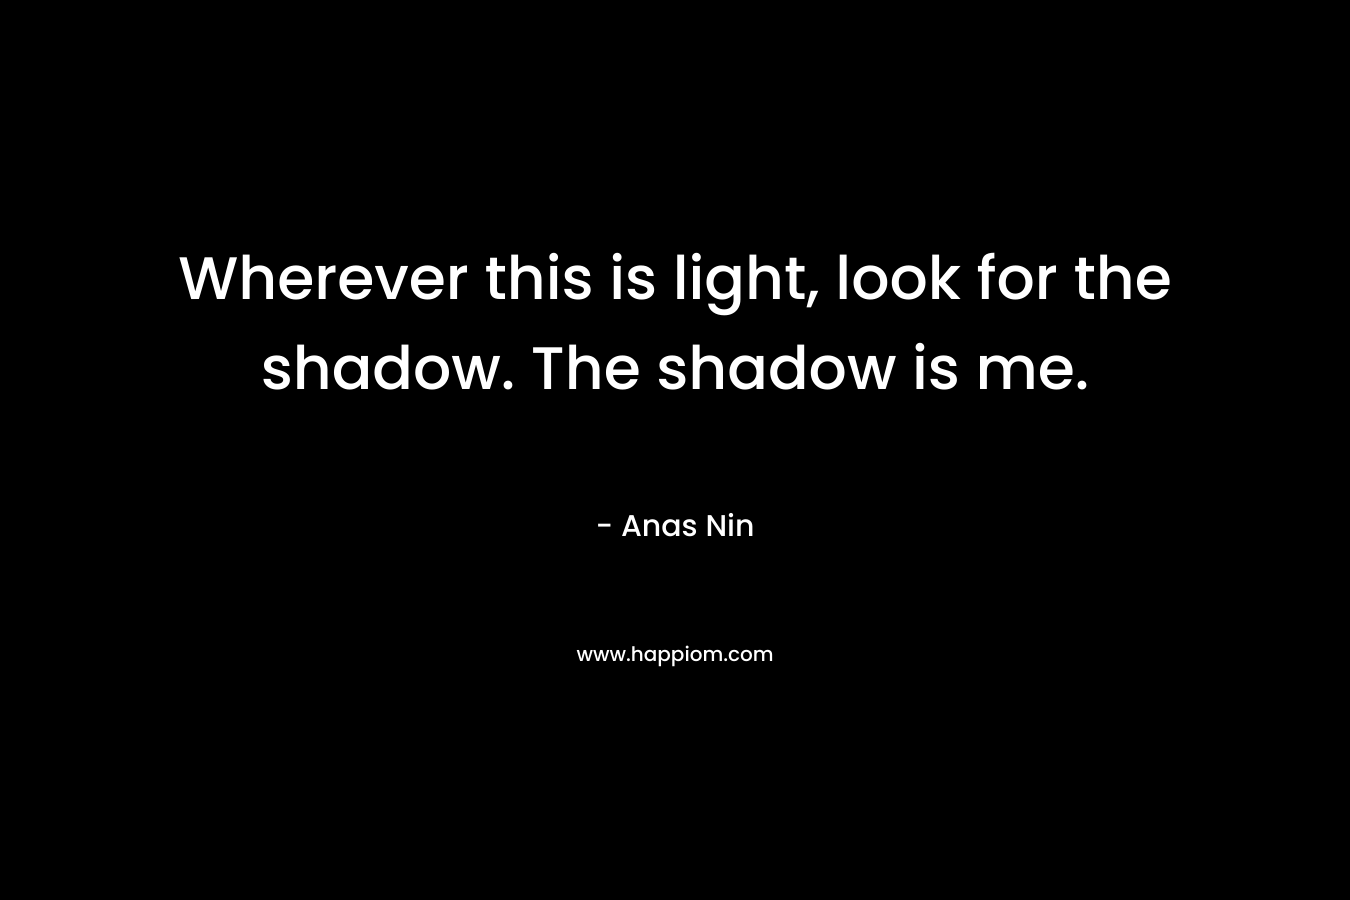 Wherever this is light, look for the shadow. The shadow is me.